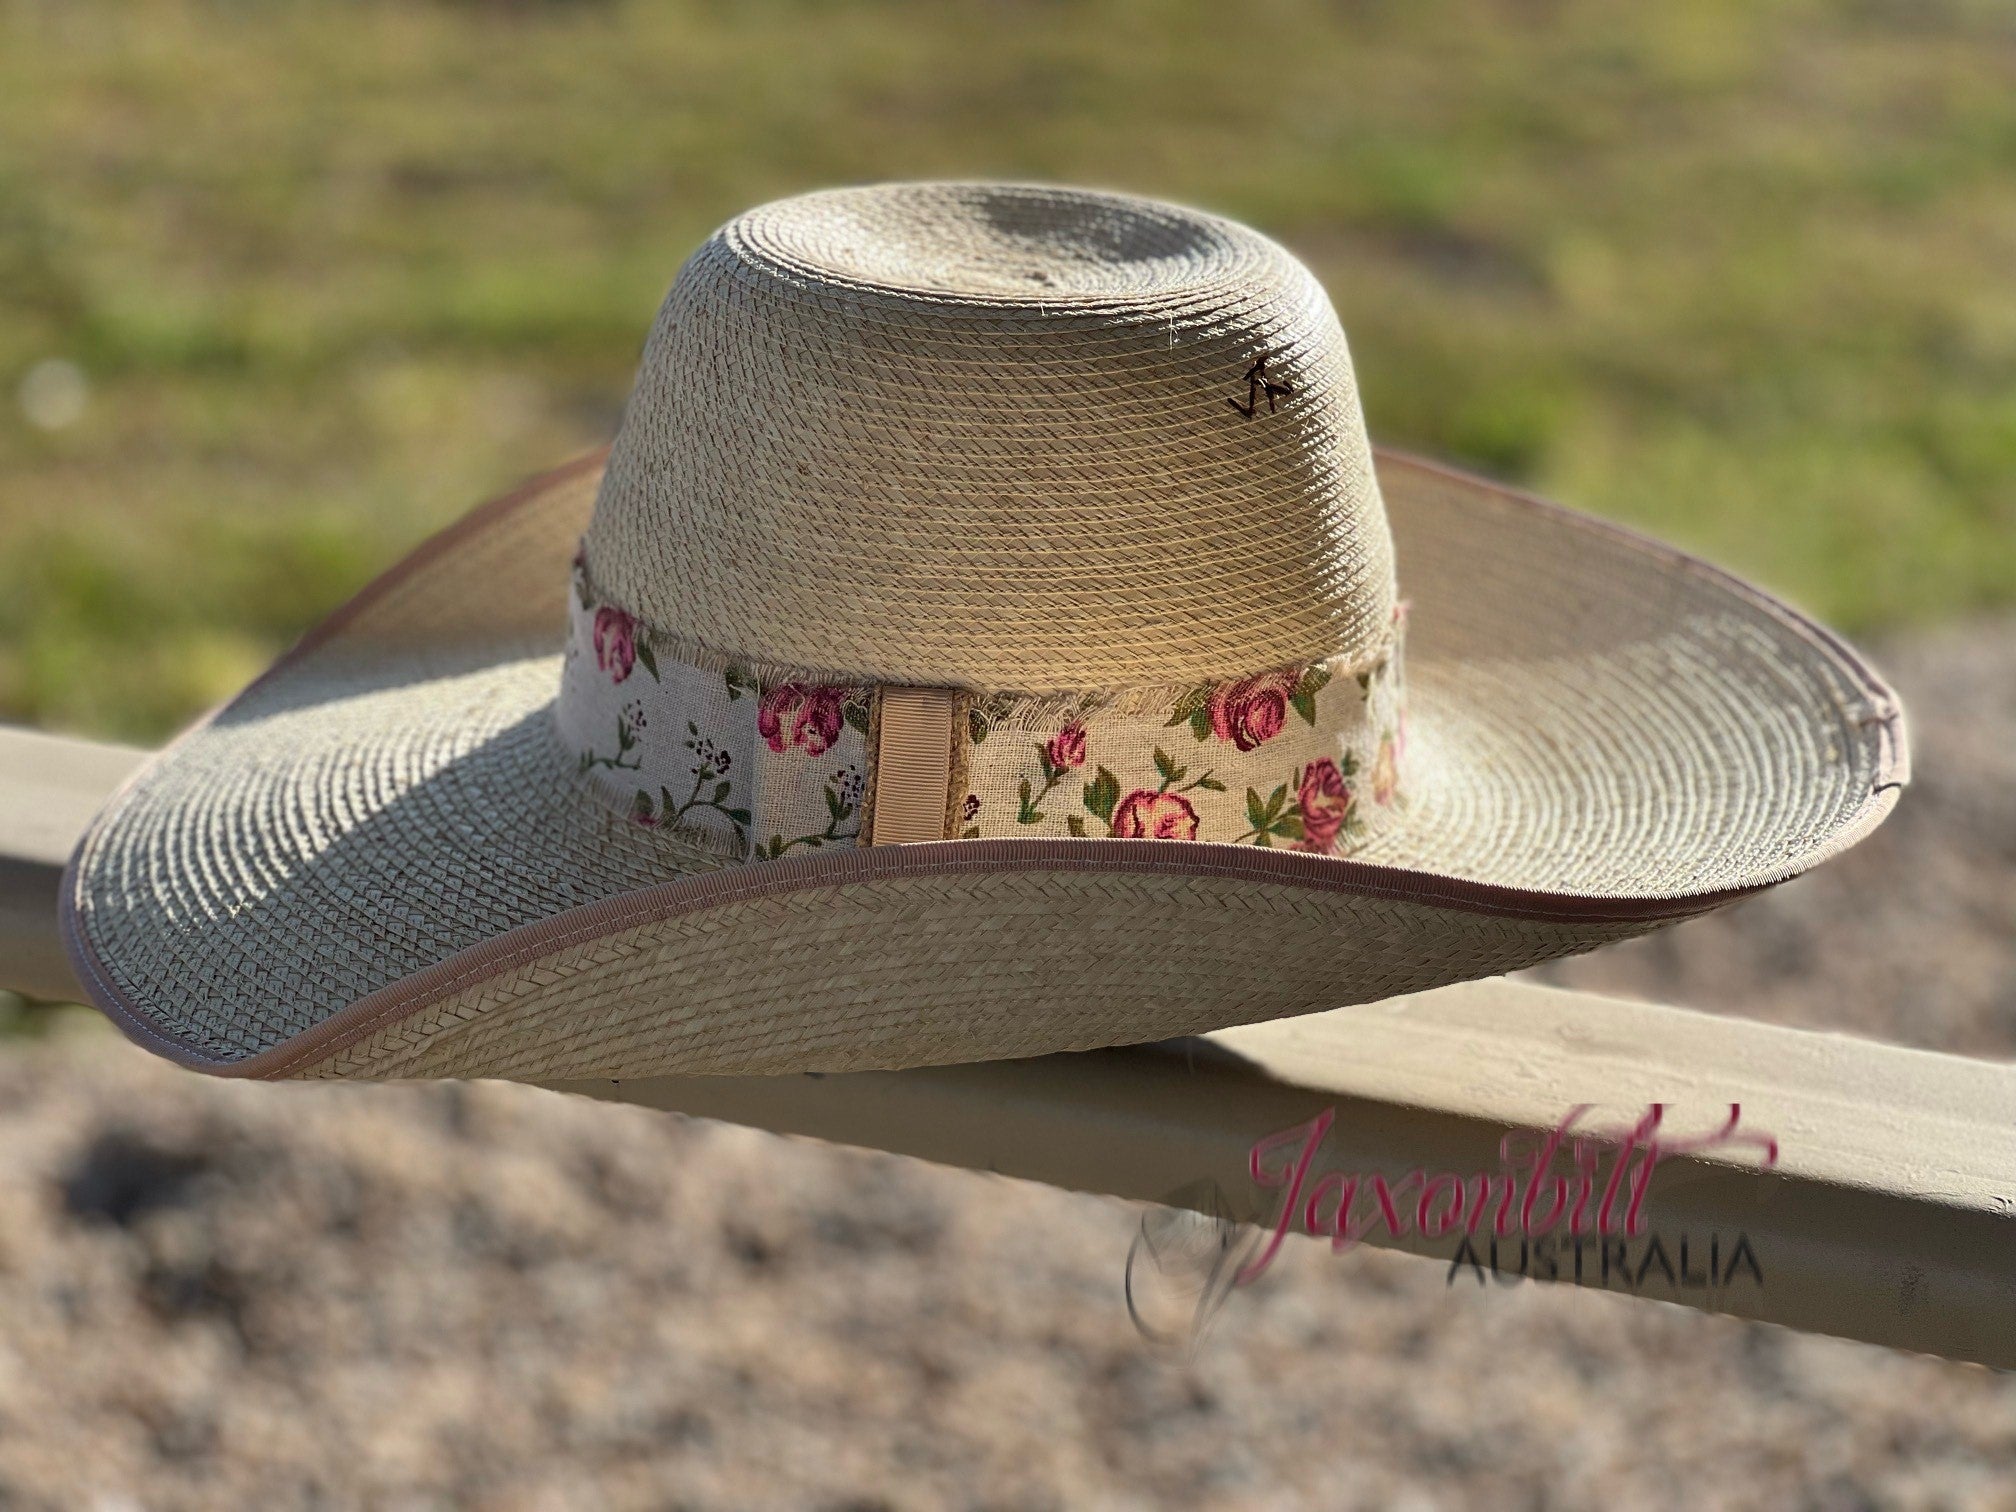 Jaxonbilt_Hats_are_Australian_made_palm_leaf_hats_and_crossbred_hats_for_cowgirls_and_cowboys_with_wide_brims_for_sun_protection_5”_brim_trim_on_edge_wide_crown_band_cool_hand_luke_shape